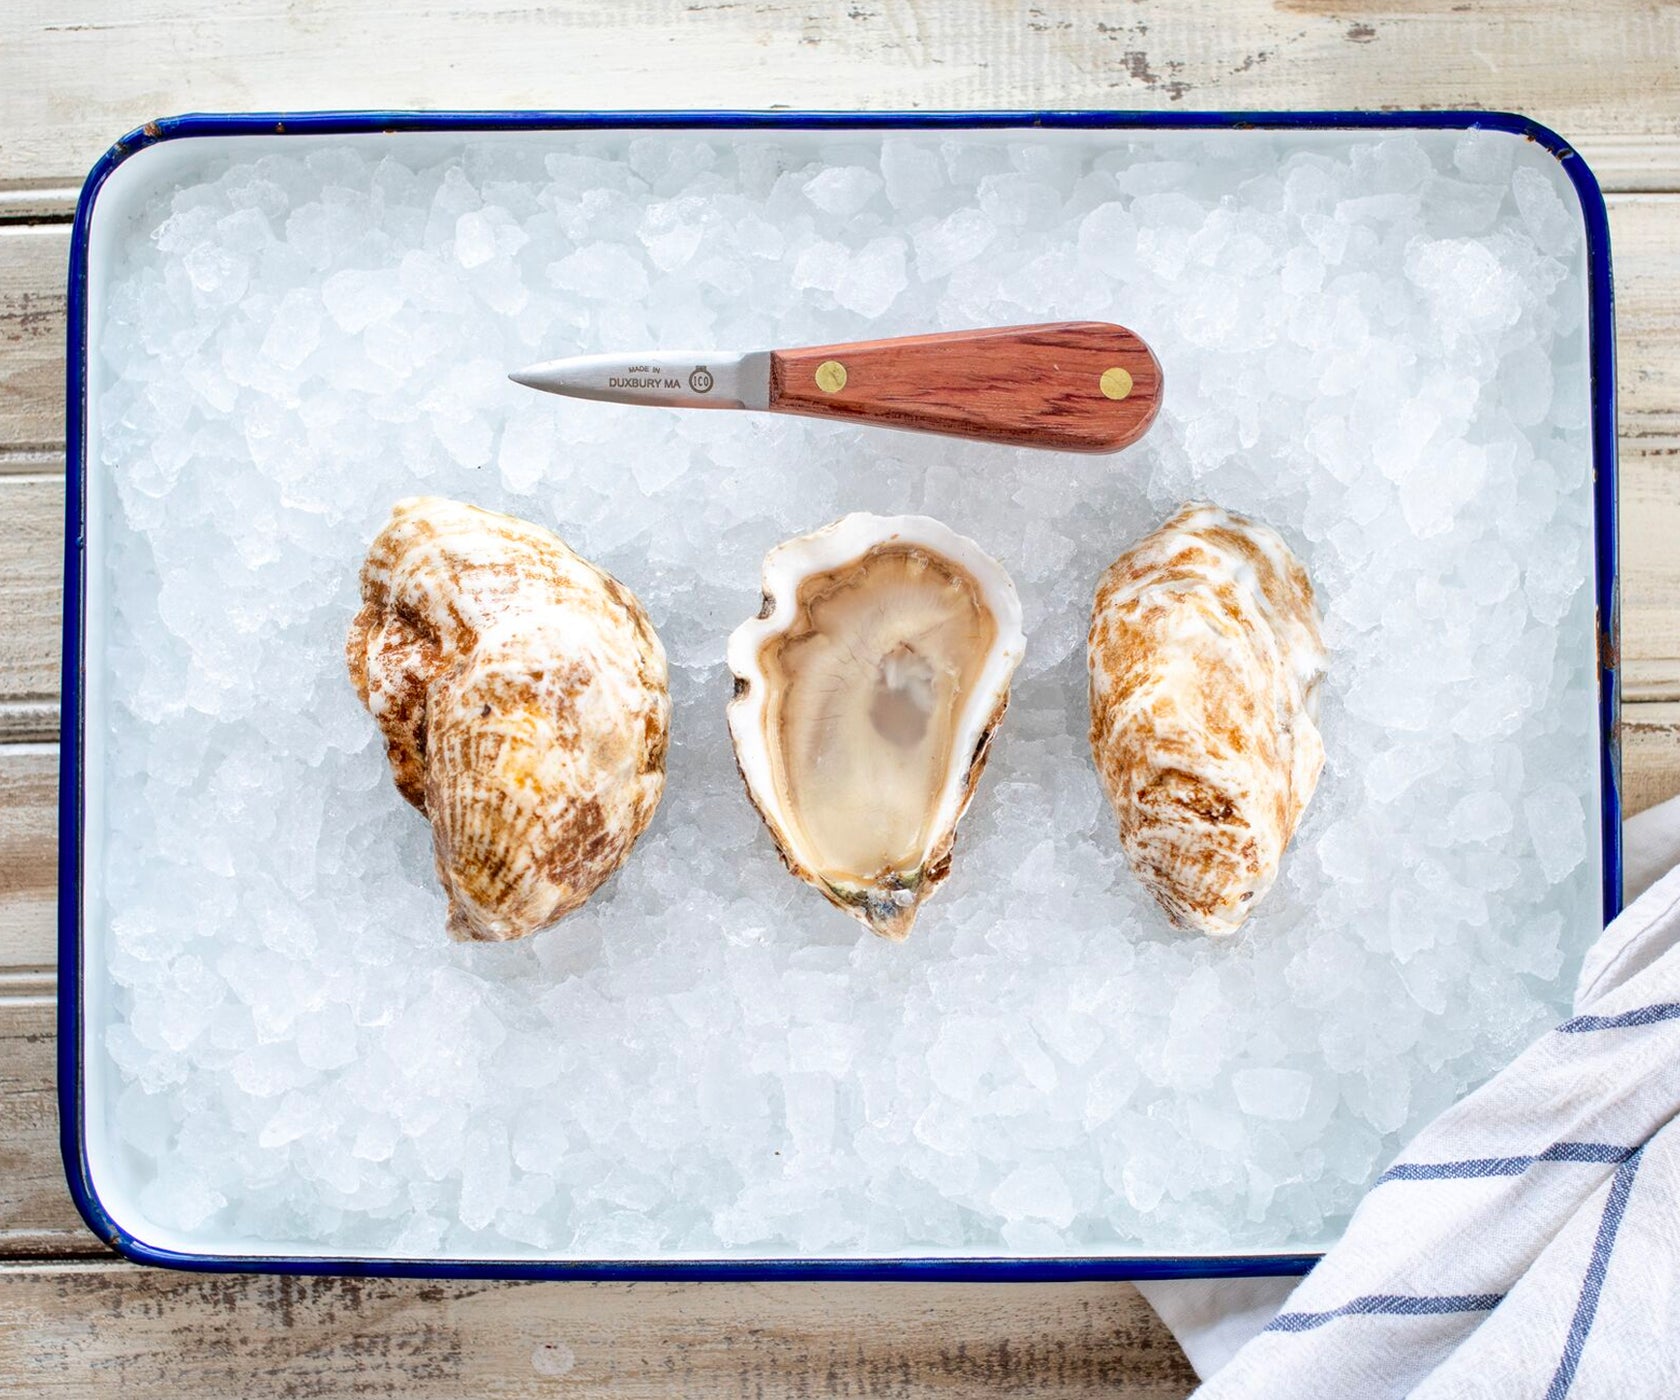 Sweet Neck Oysters from Martha's Vineyard, MA